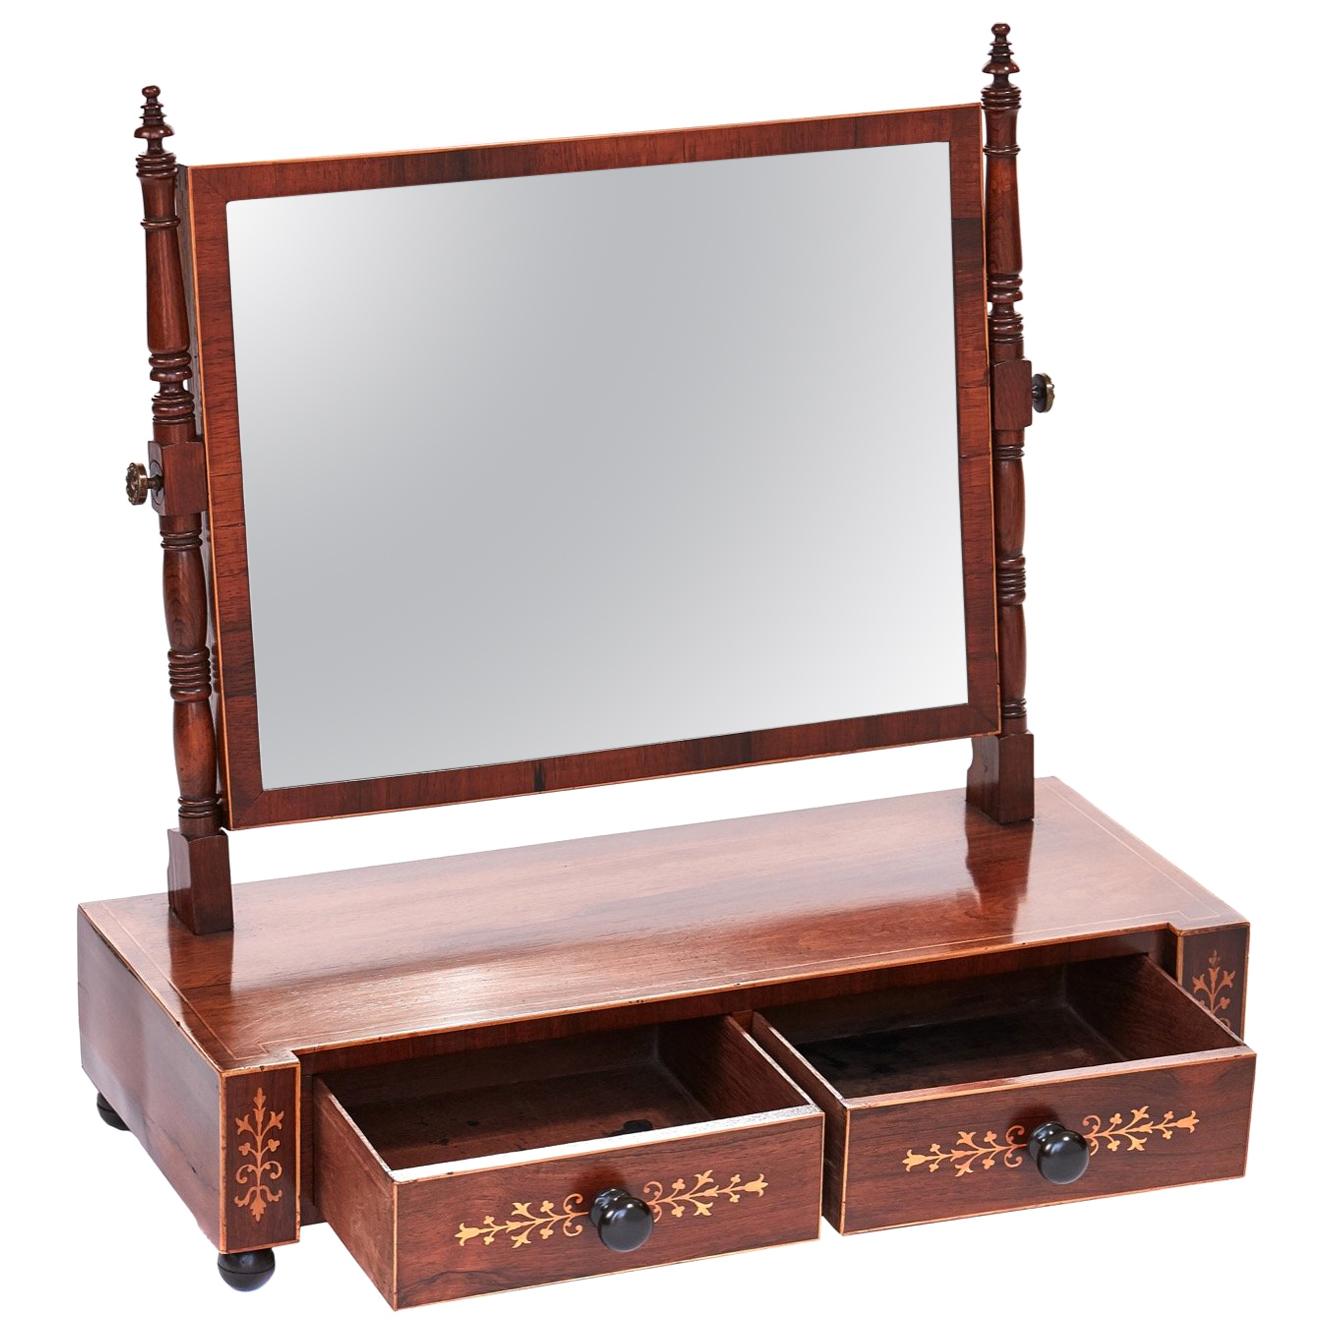 Decorative antique Regency hardwood inlaid dressing mirror having a rectangular swing mirror with boxwood line around the edge, two turned decorative supports each side with original brass knobs. The base having two drawers with decorative inlay on